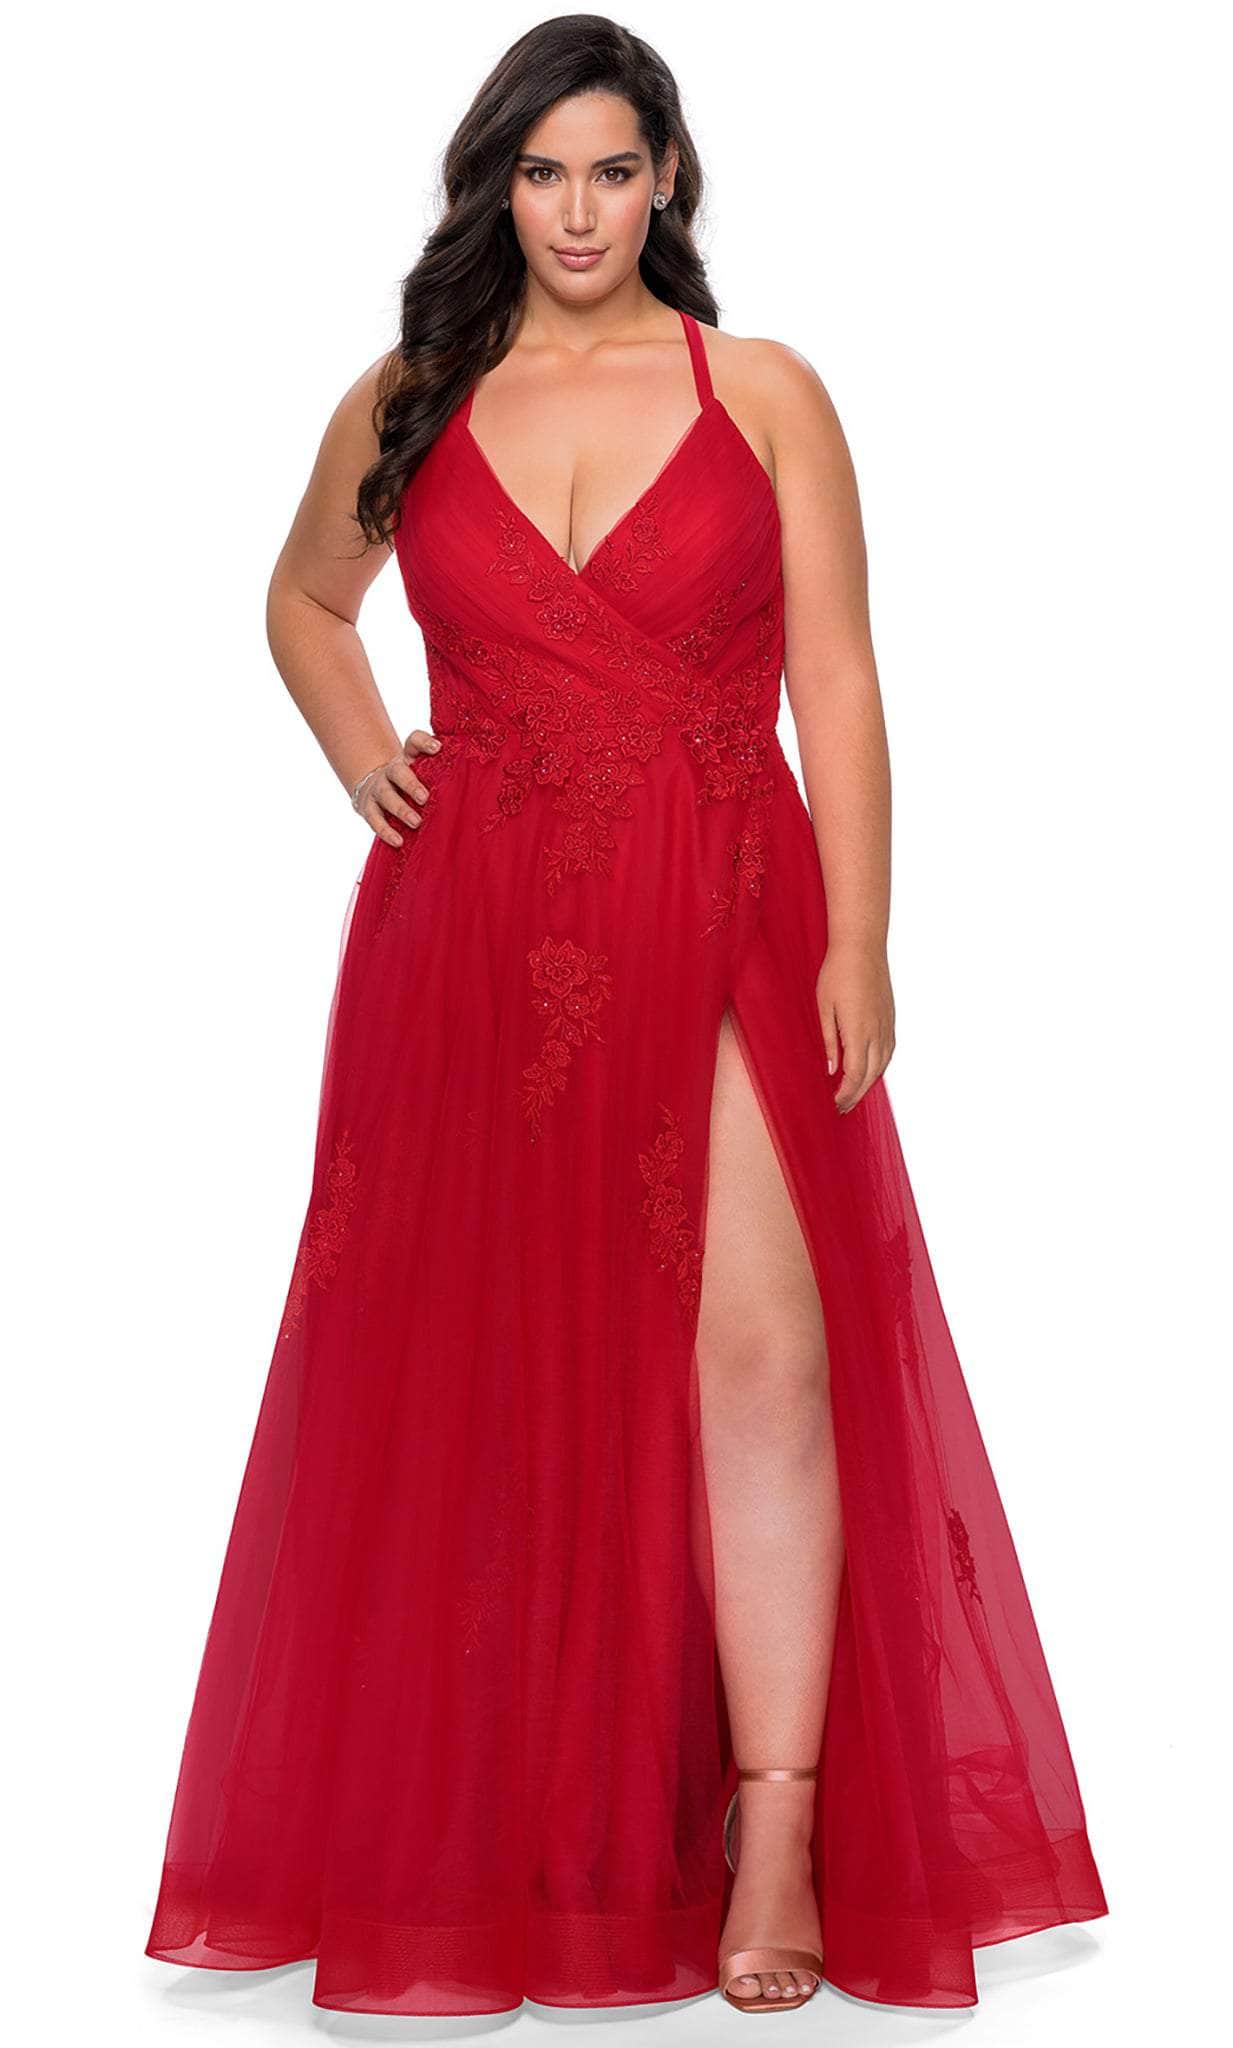 Image of La Femme - 29021 Plunging V-neck Tulle Plus Size Prom Gown